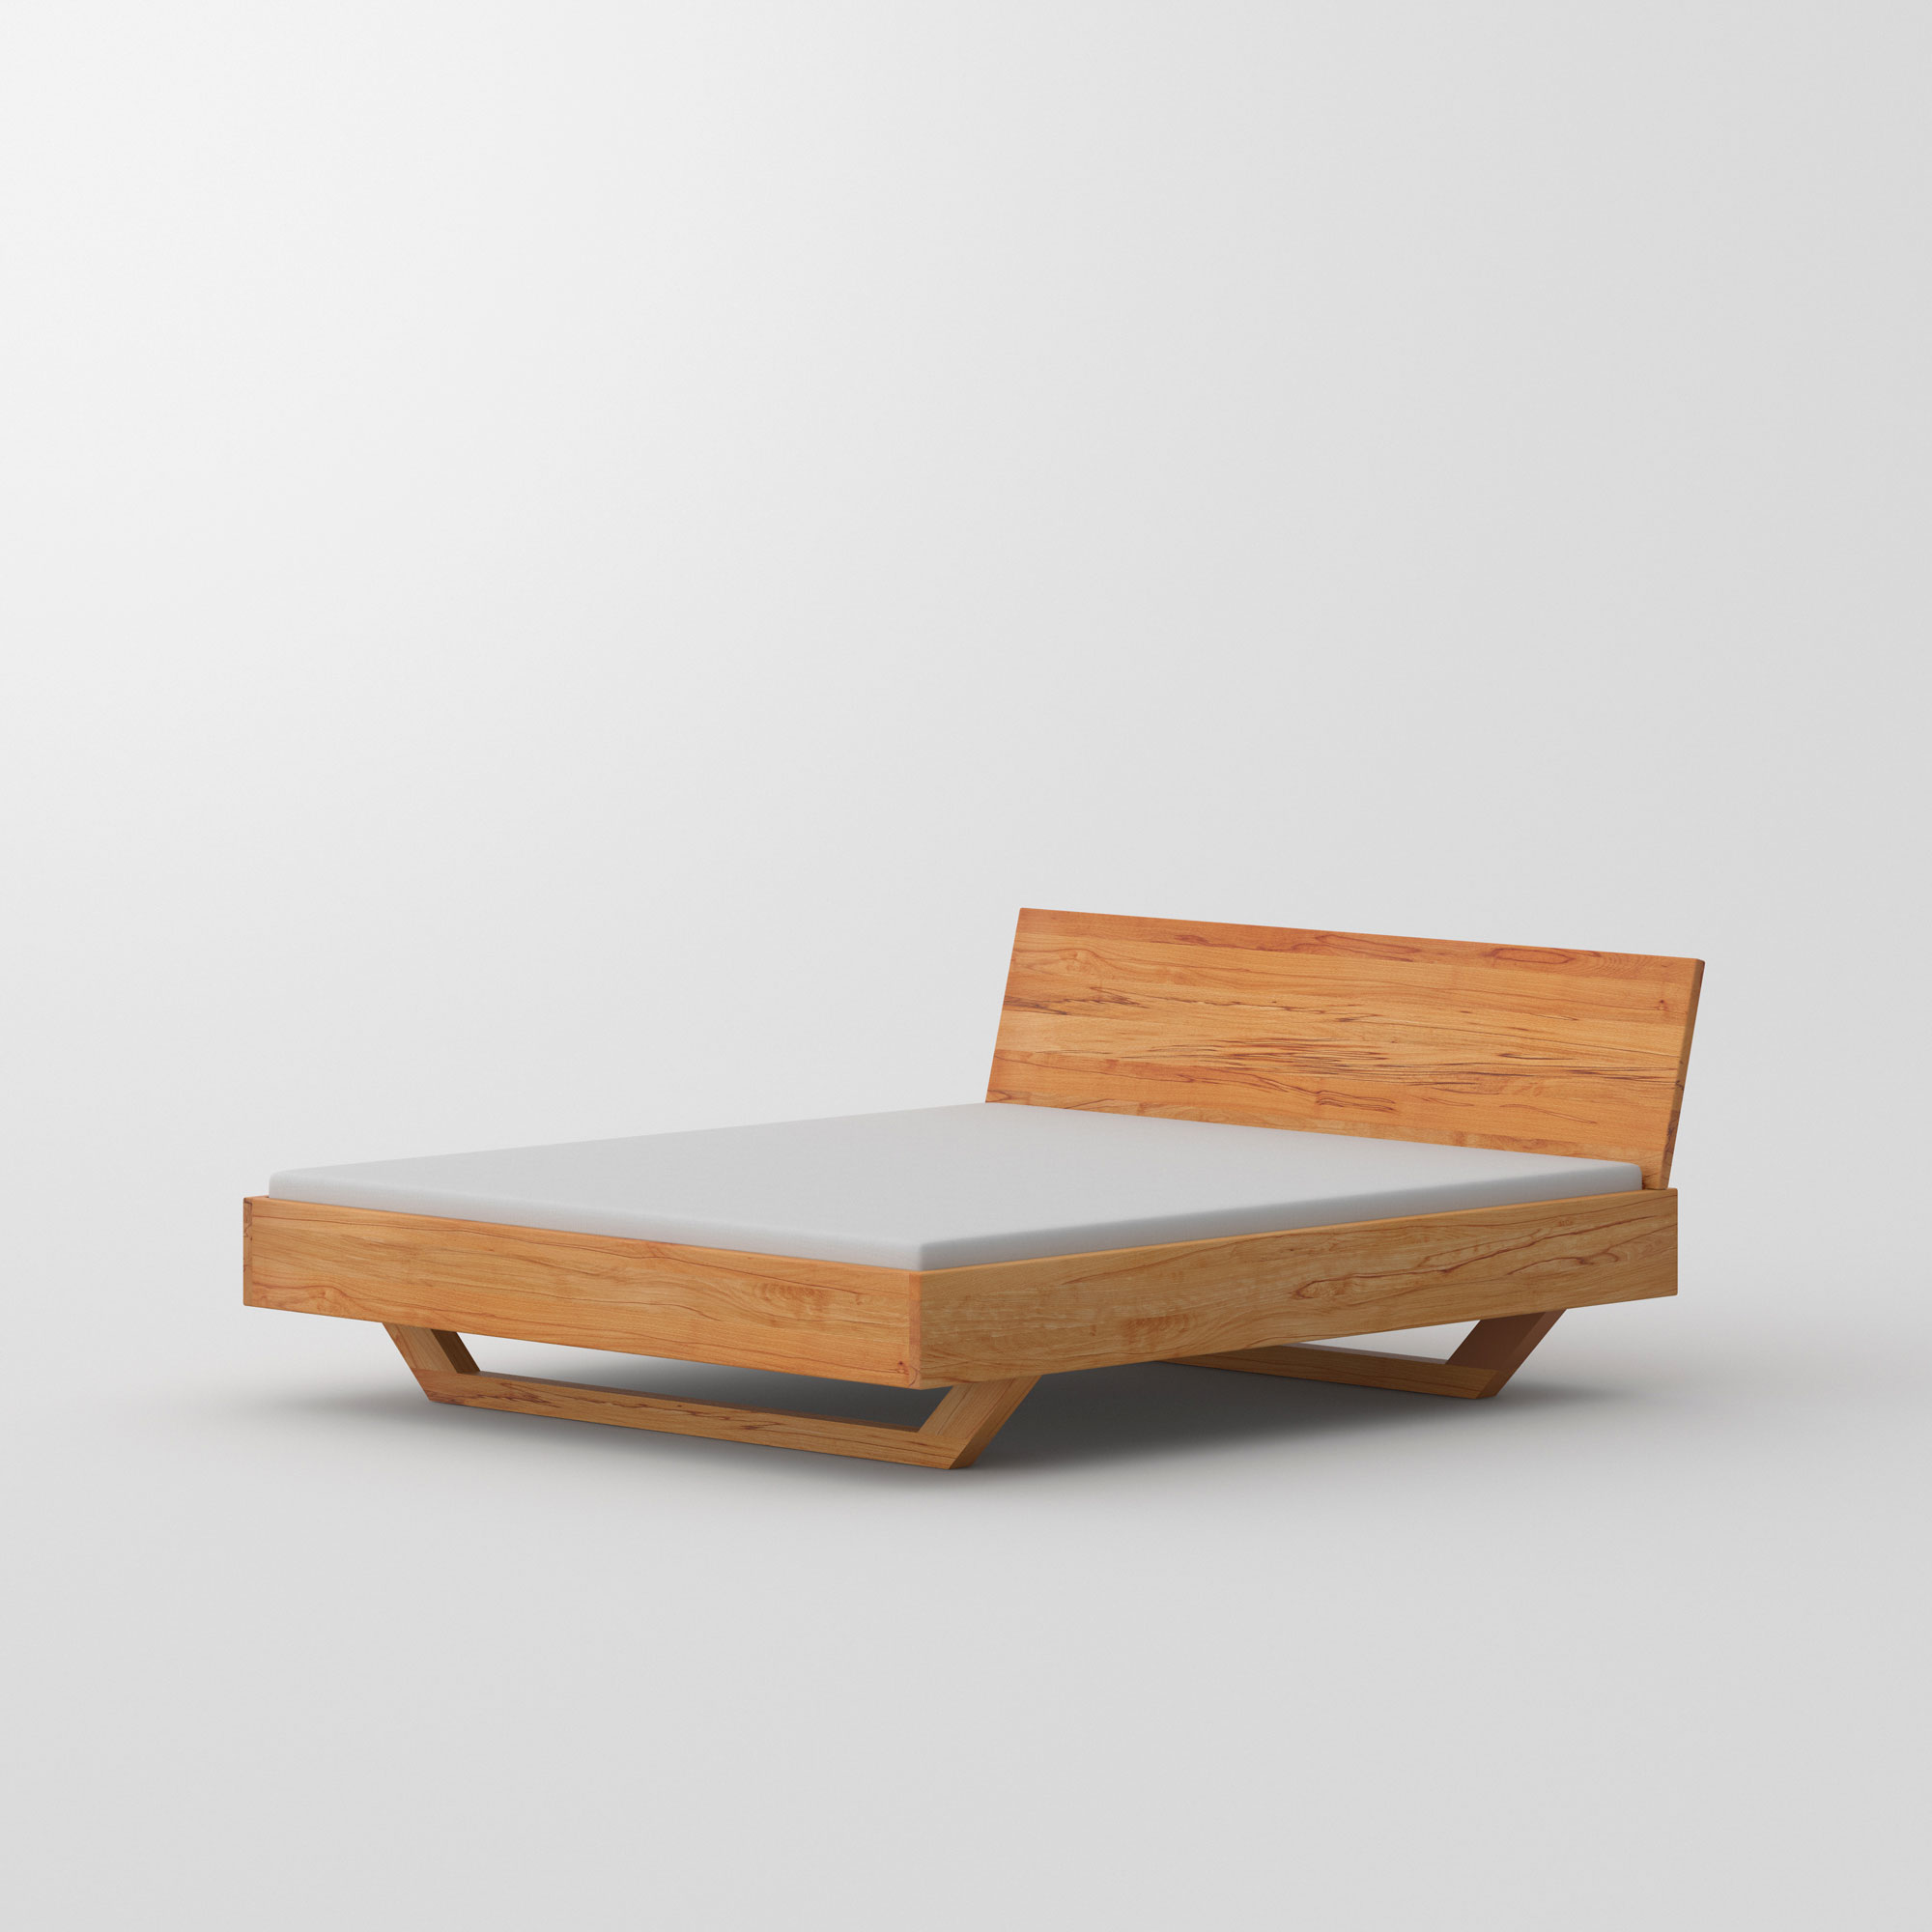 Solid Wooden Bed QUADRA SOFT cam1 custom made in solid wood by vitamin design